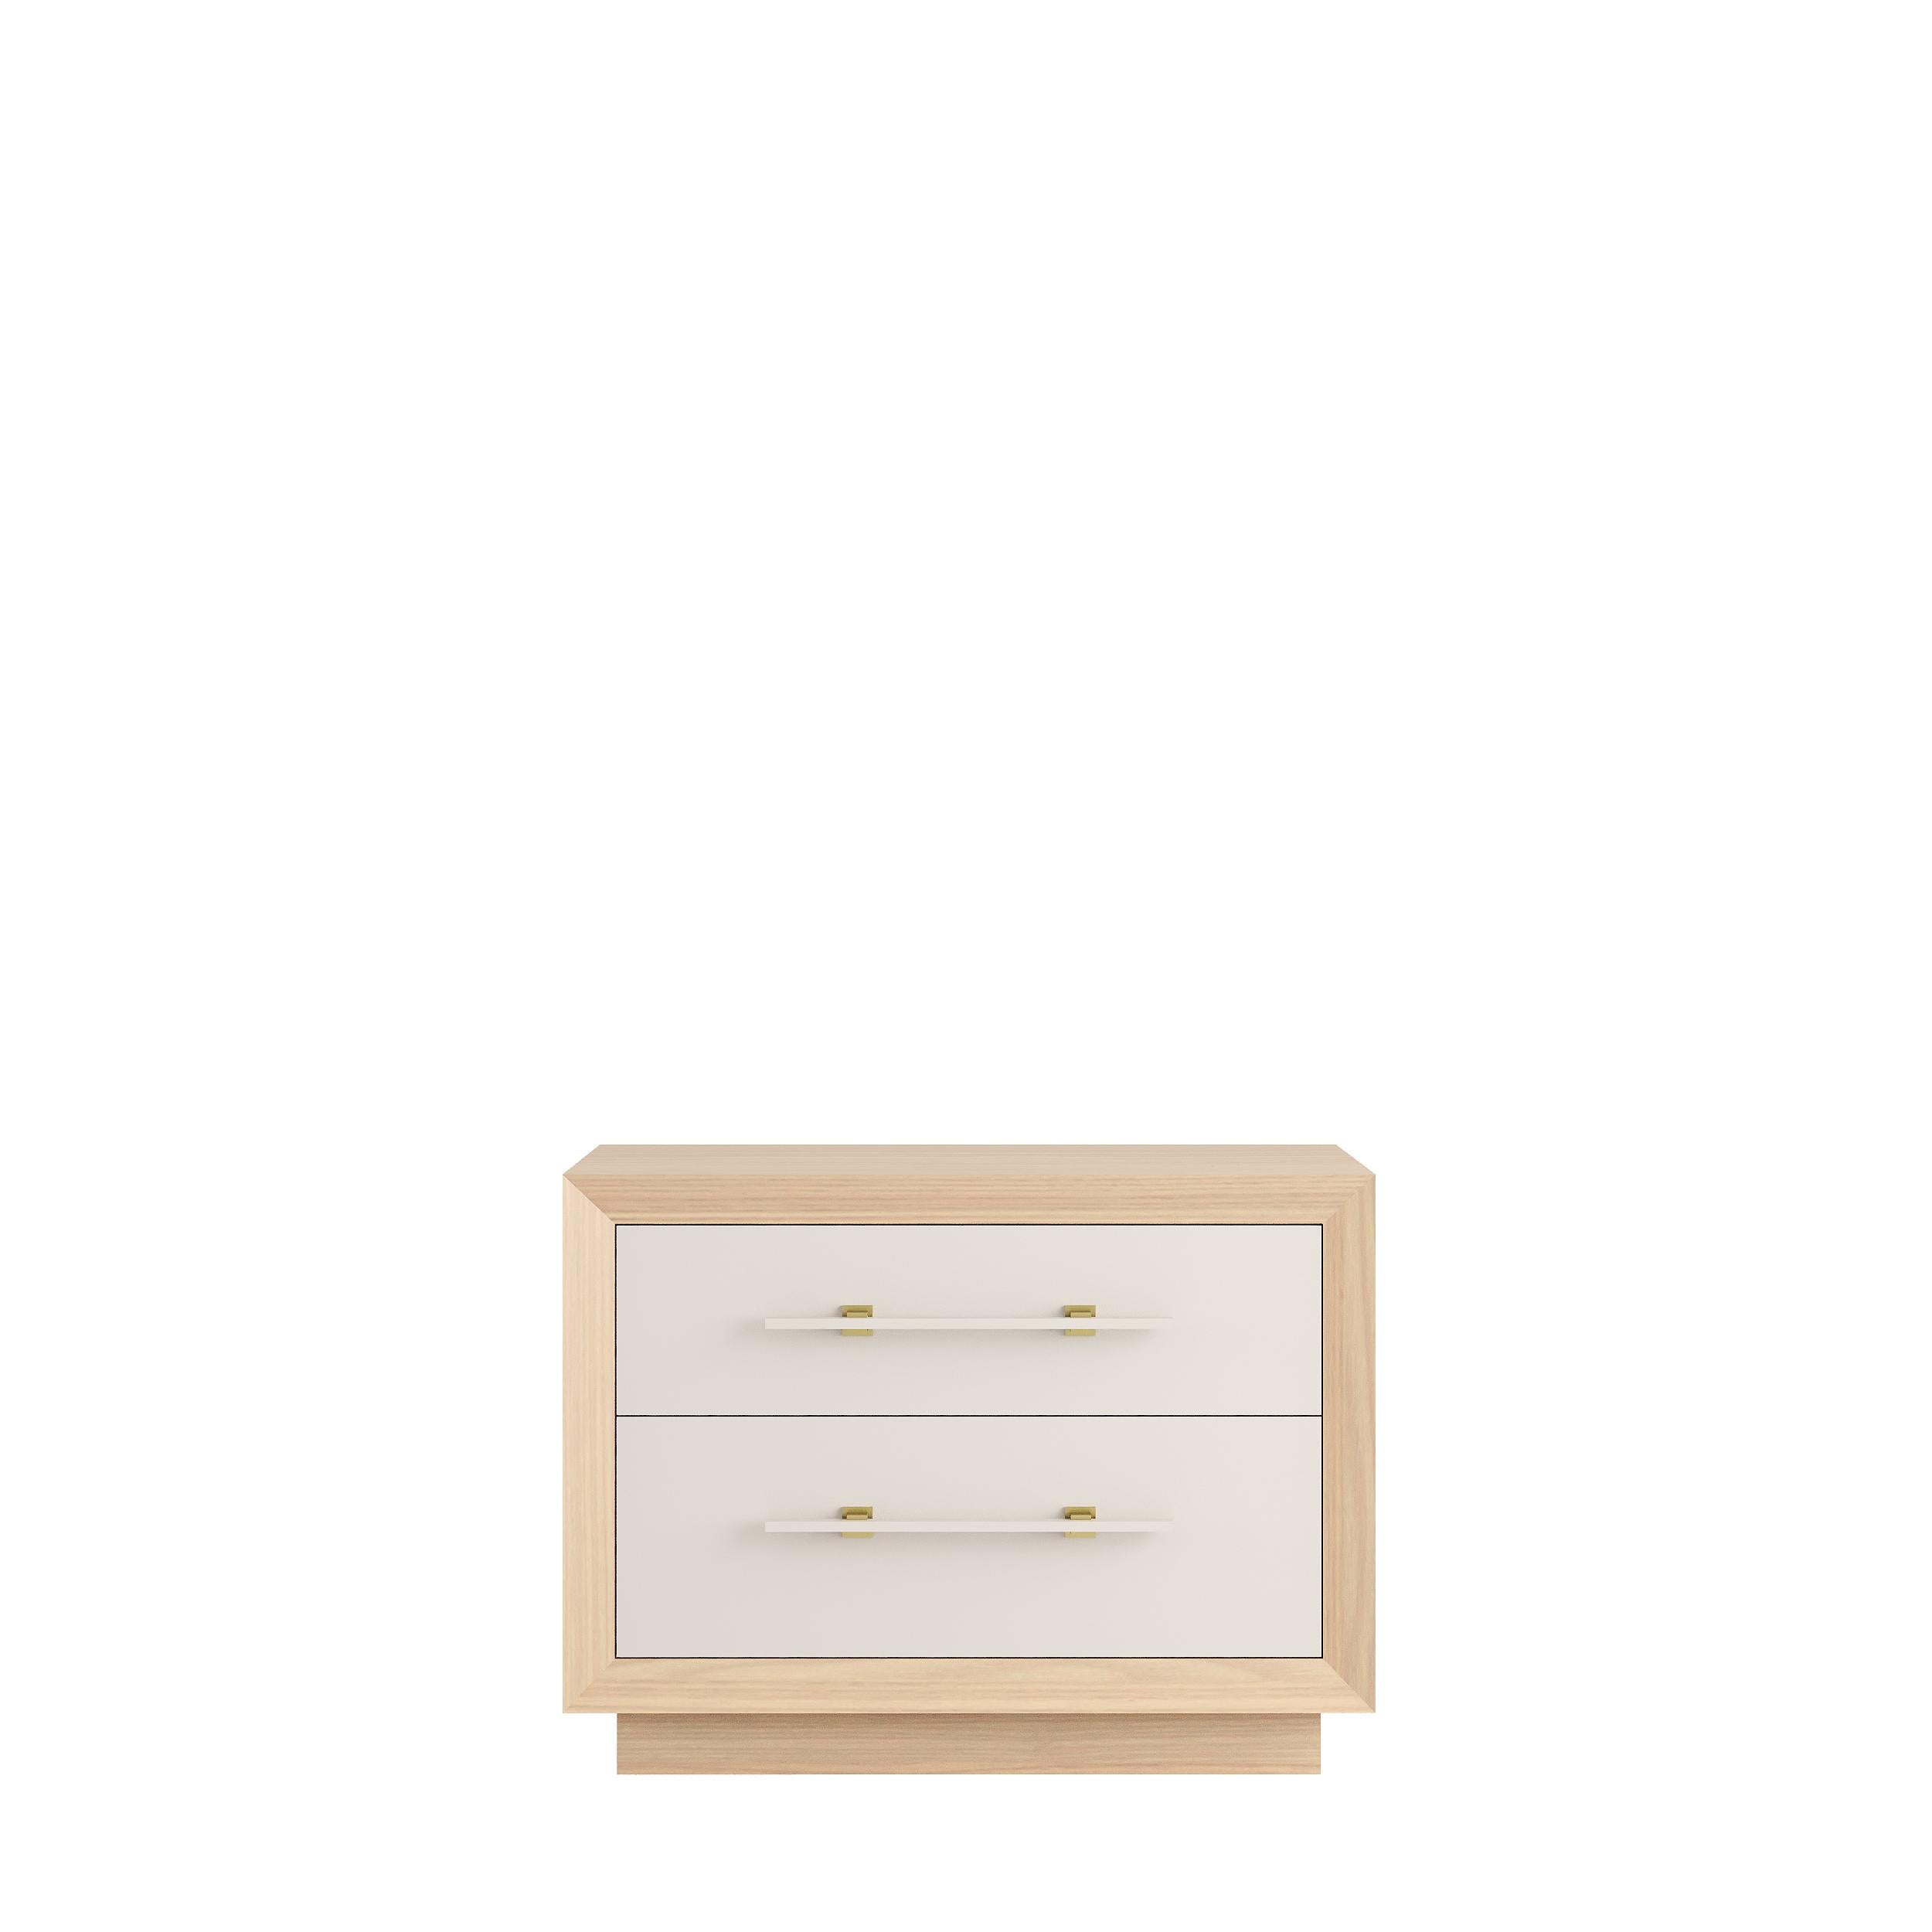 Contemporary MAGNA large nightstand - wooden base For Sale